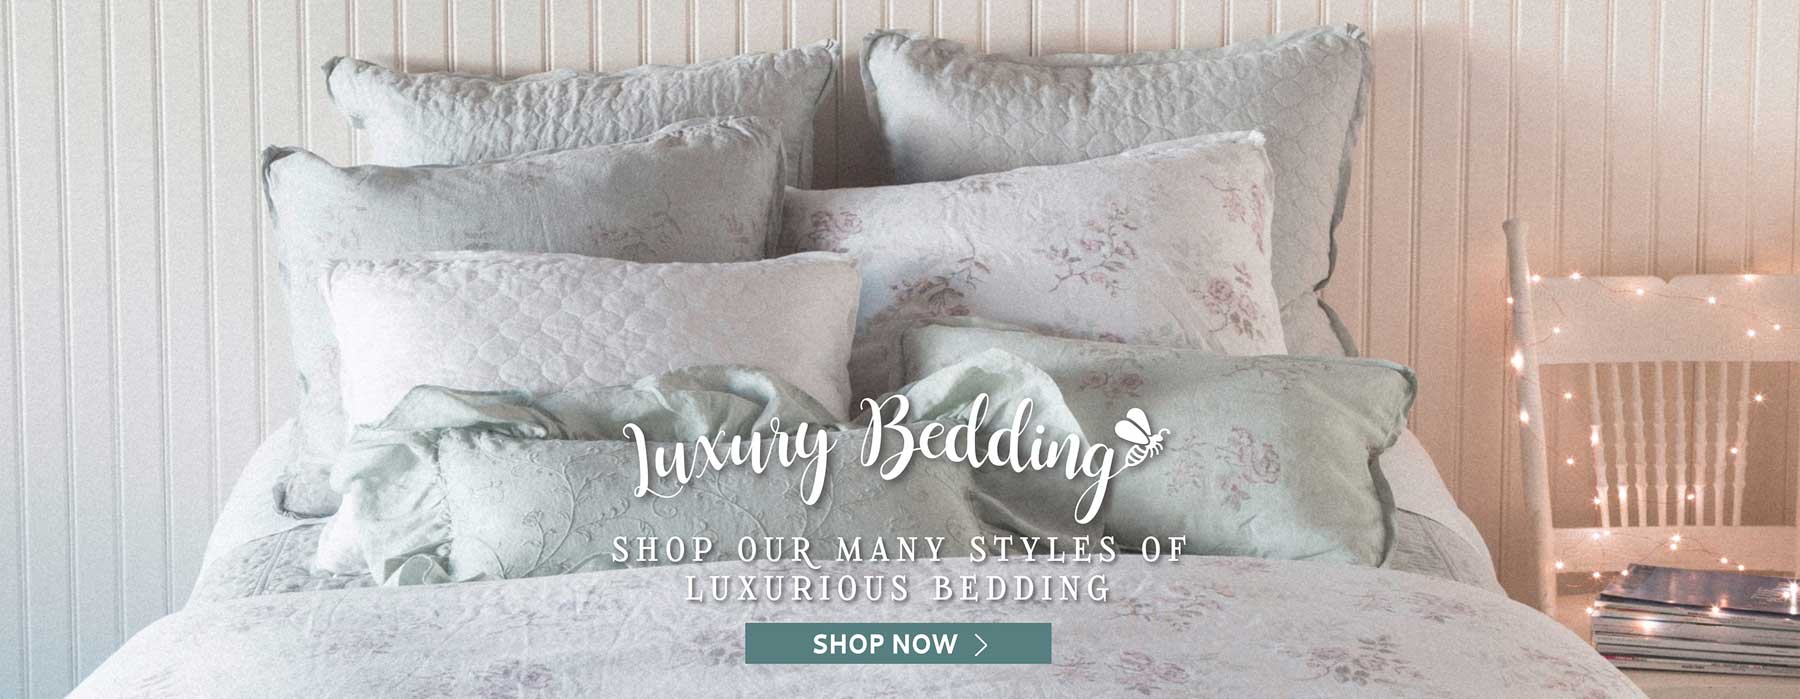 Luxury Bedding - Shop Our Many Styles of Luxurious Bedding